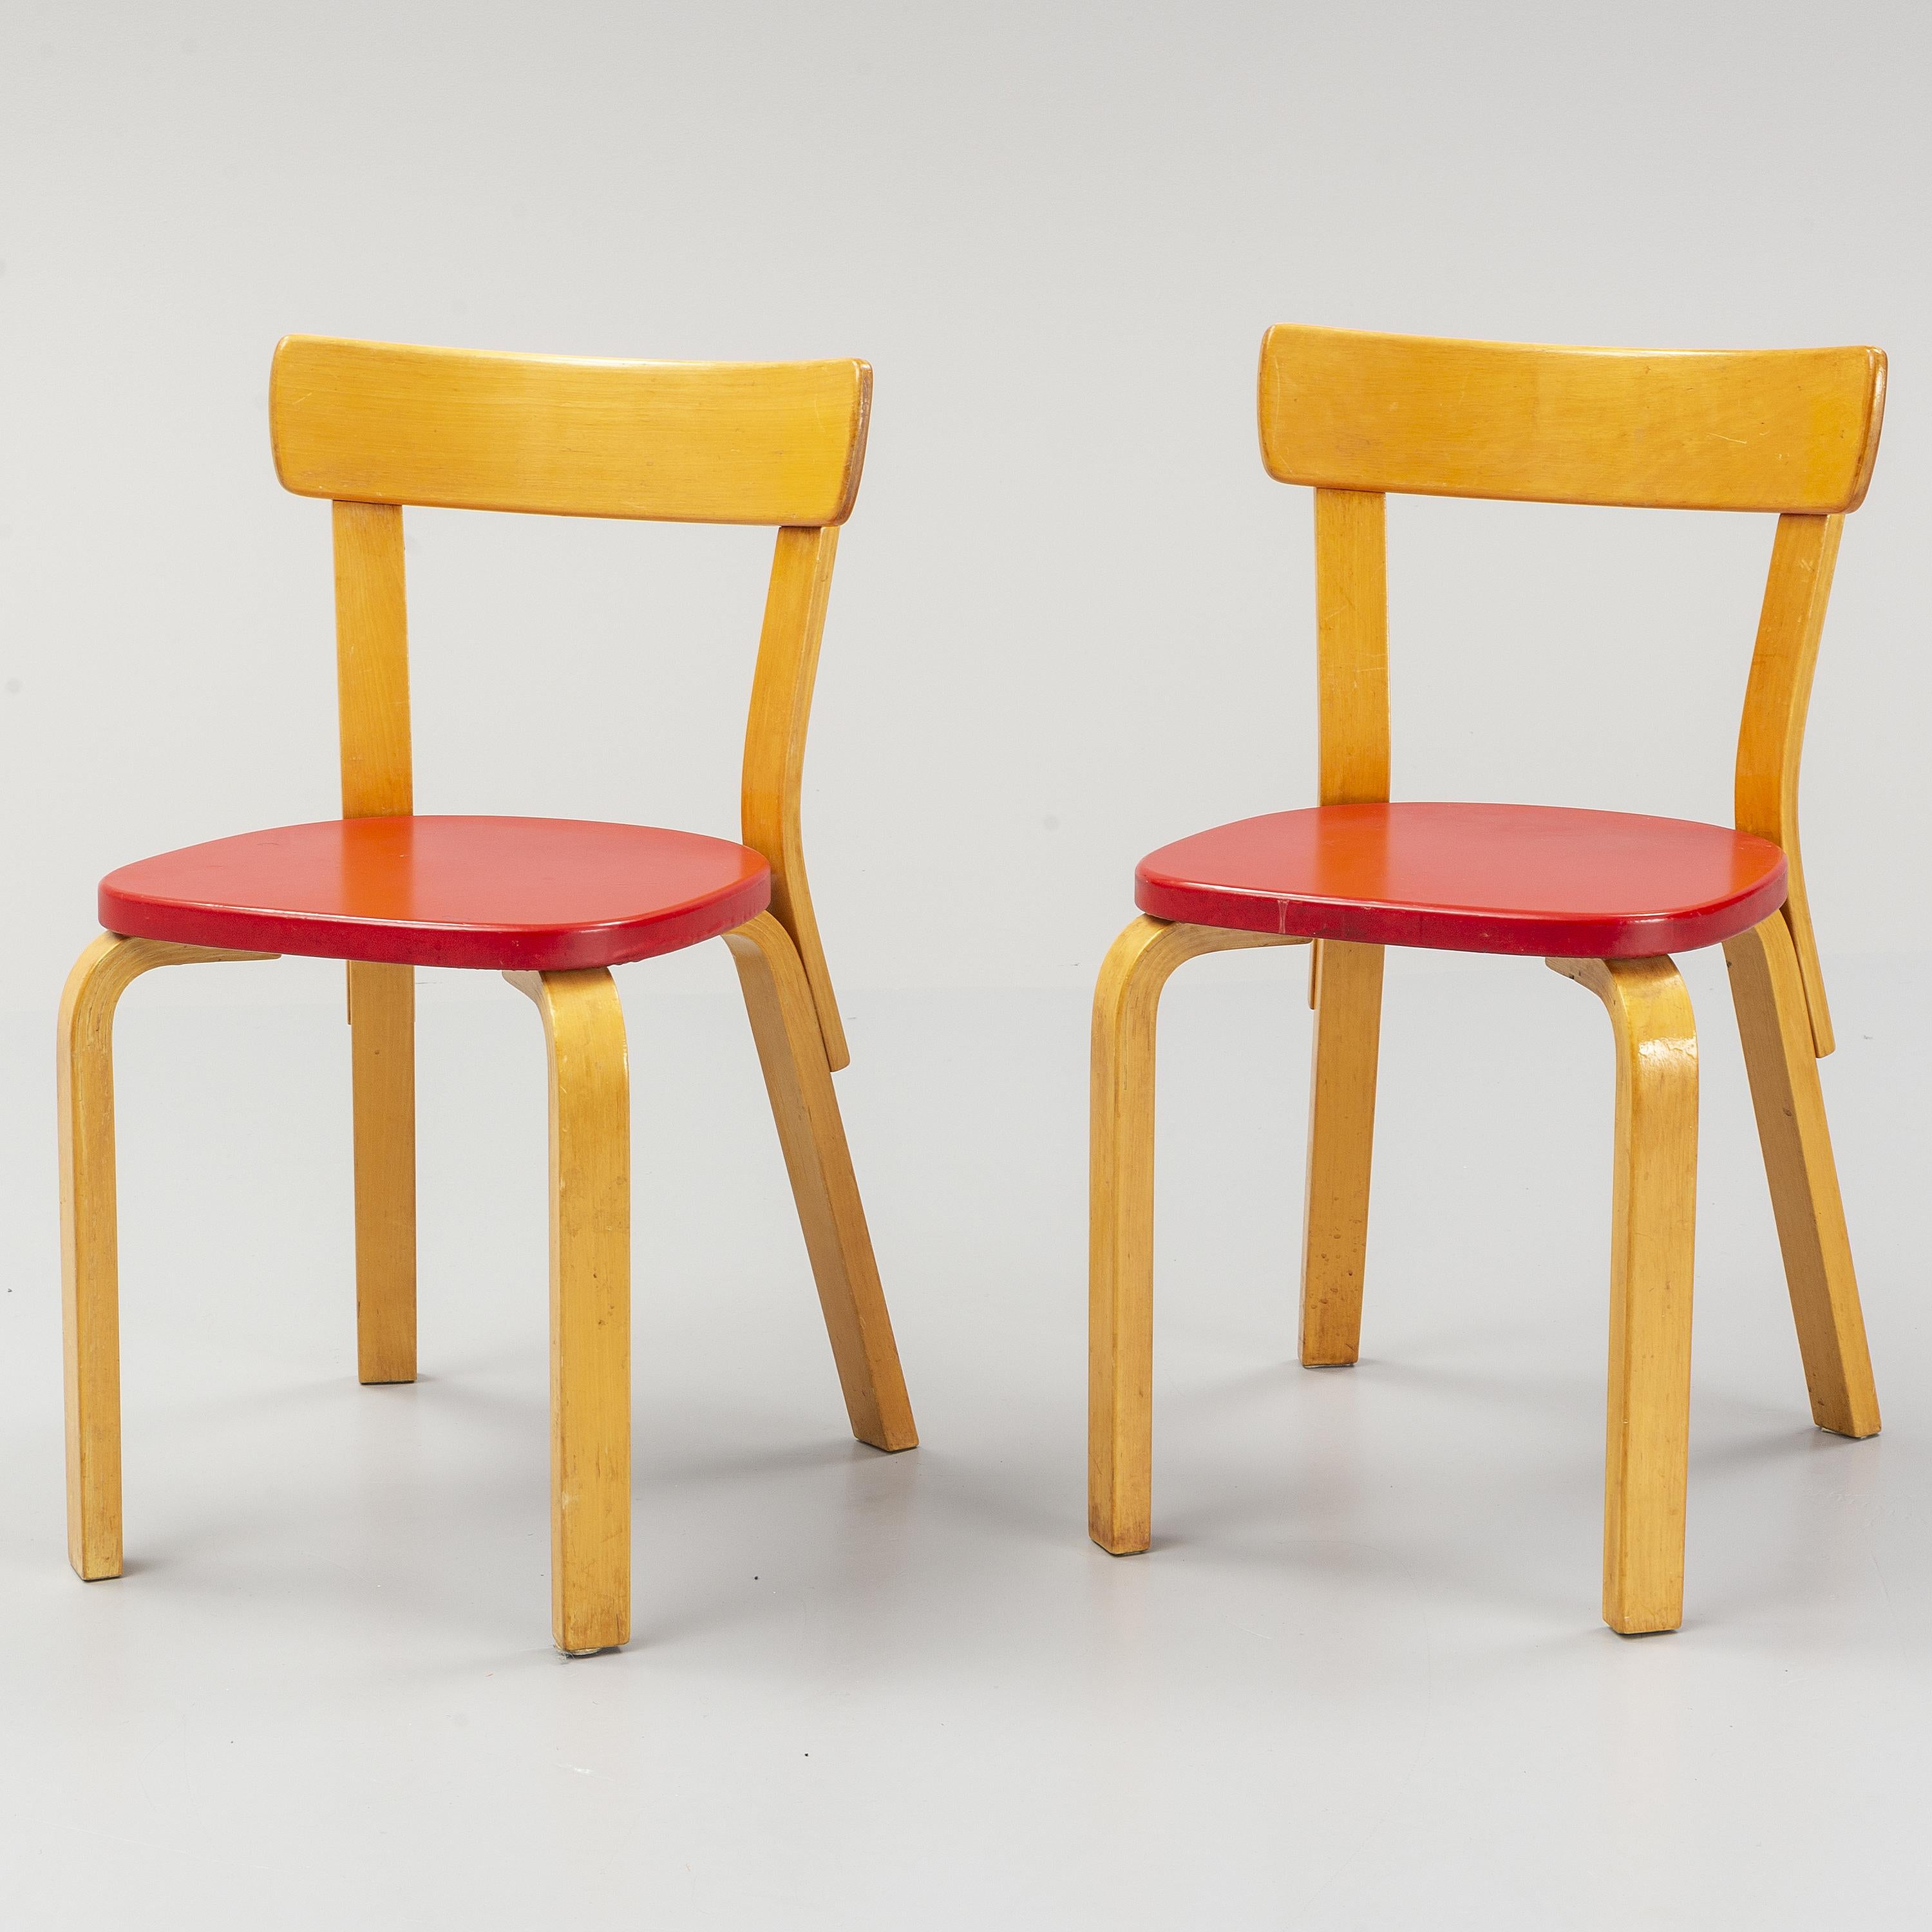 Finnish Alvar Aalto, Model 69 Chair, Set of 4 from 1950 For Sale